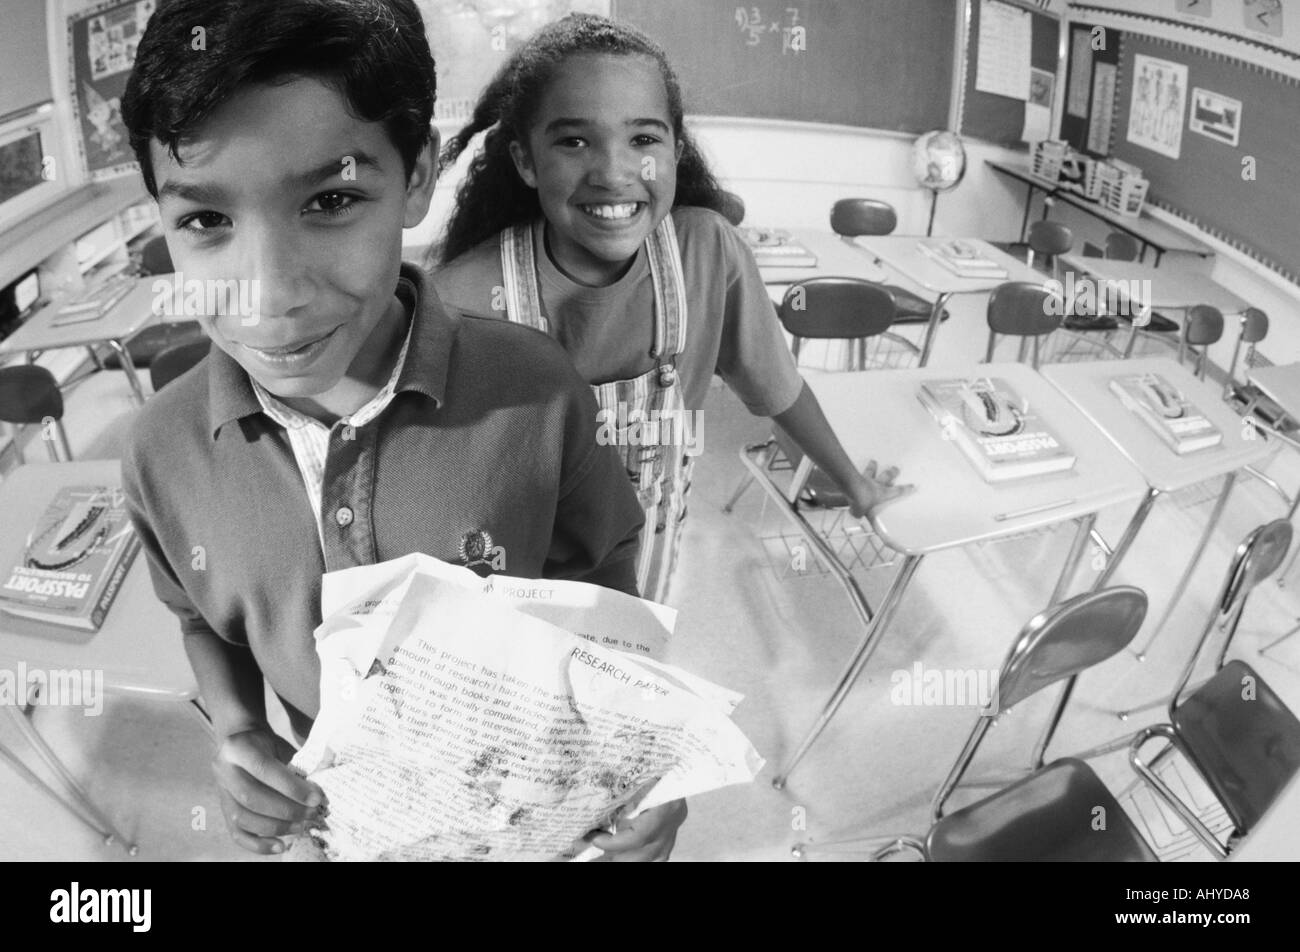 Two Latino middle school students with messy homework papers Using the excuse 'the dog ate my homework' Stock Photo